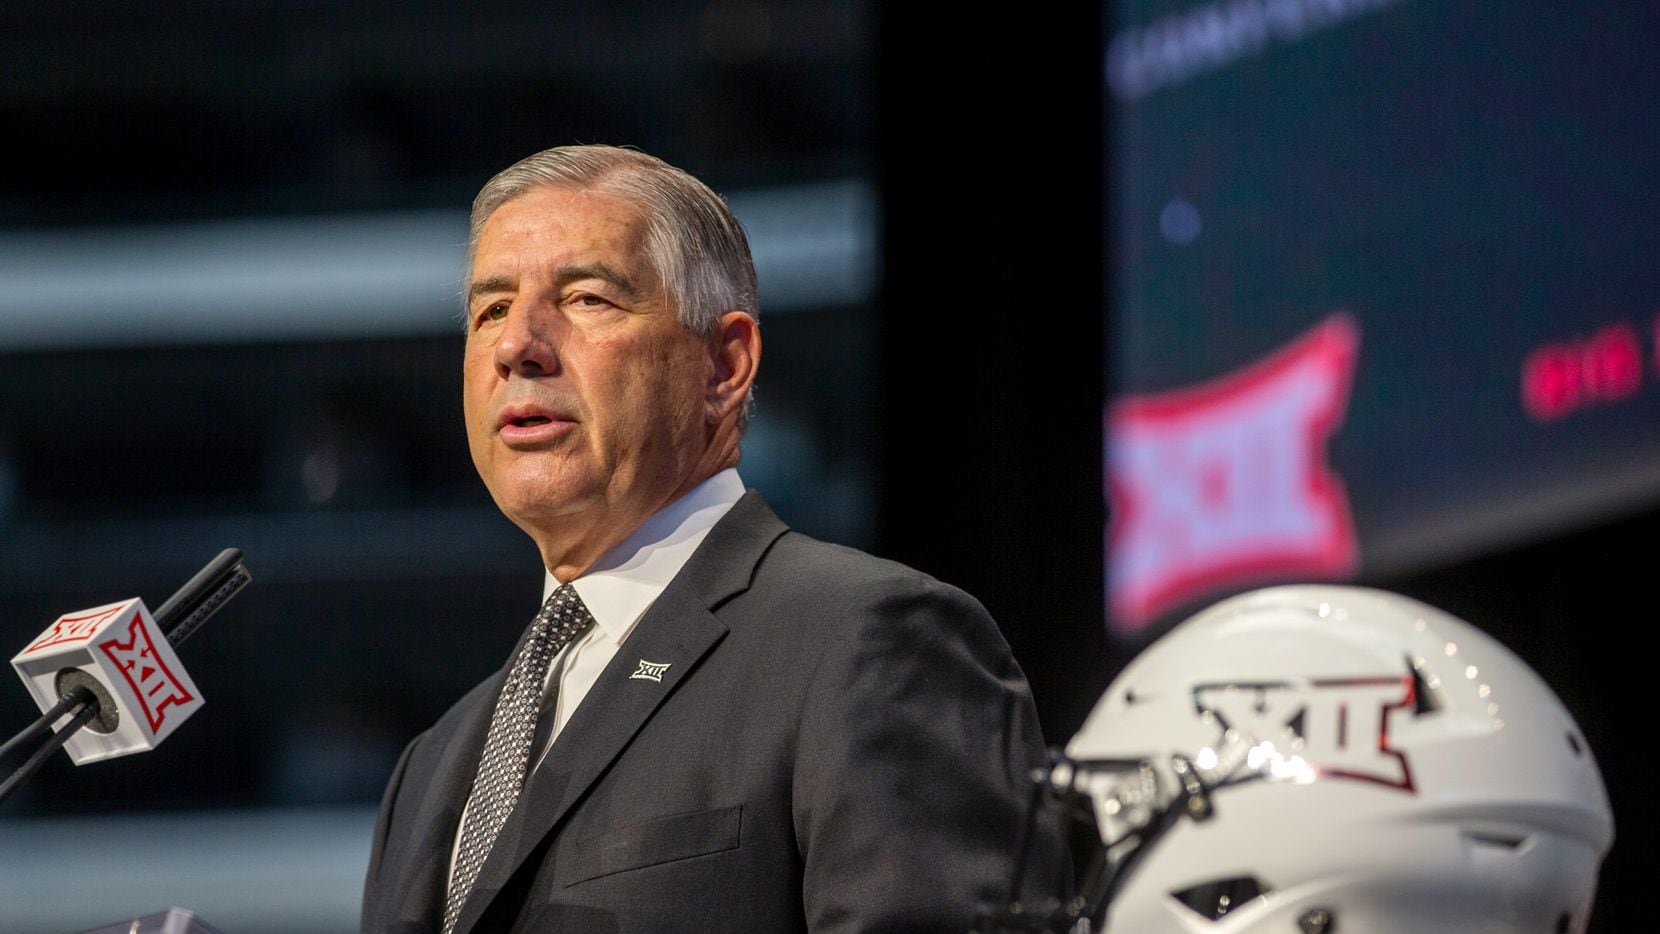 Big 12 Commissioner Bob Bowlsby speaks during the Big 12 Conference Media Days event at the AT&T Stadium in Arlington, Texas, Monday, July 15, 2019.